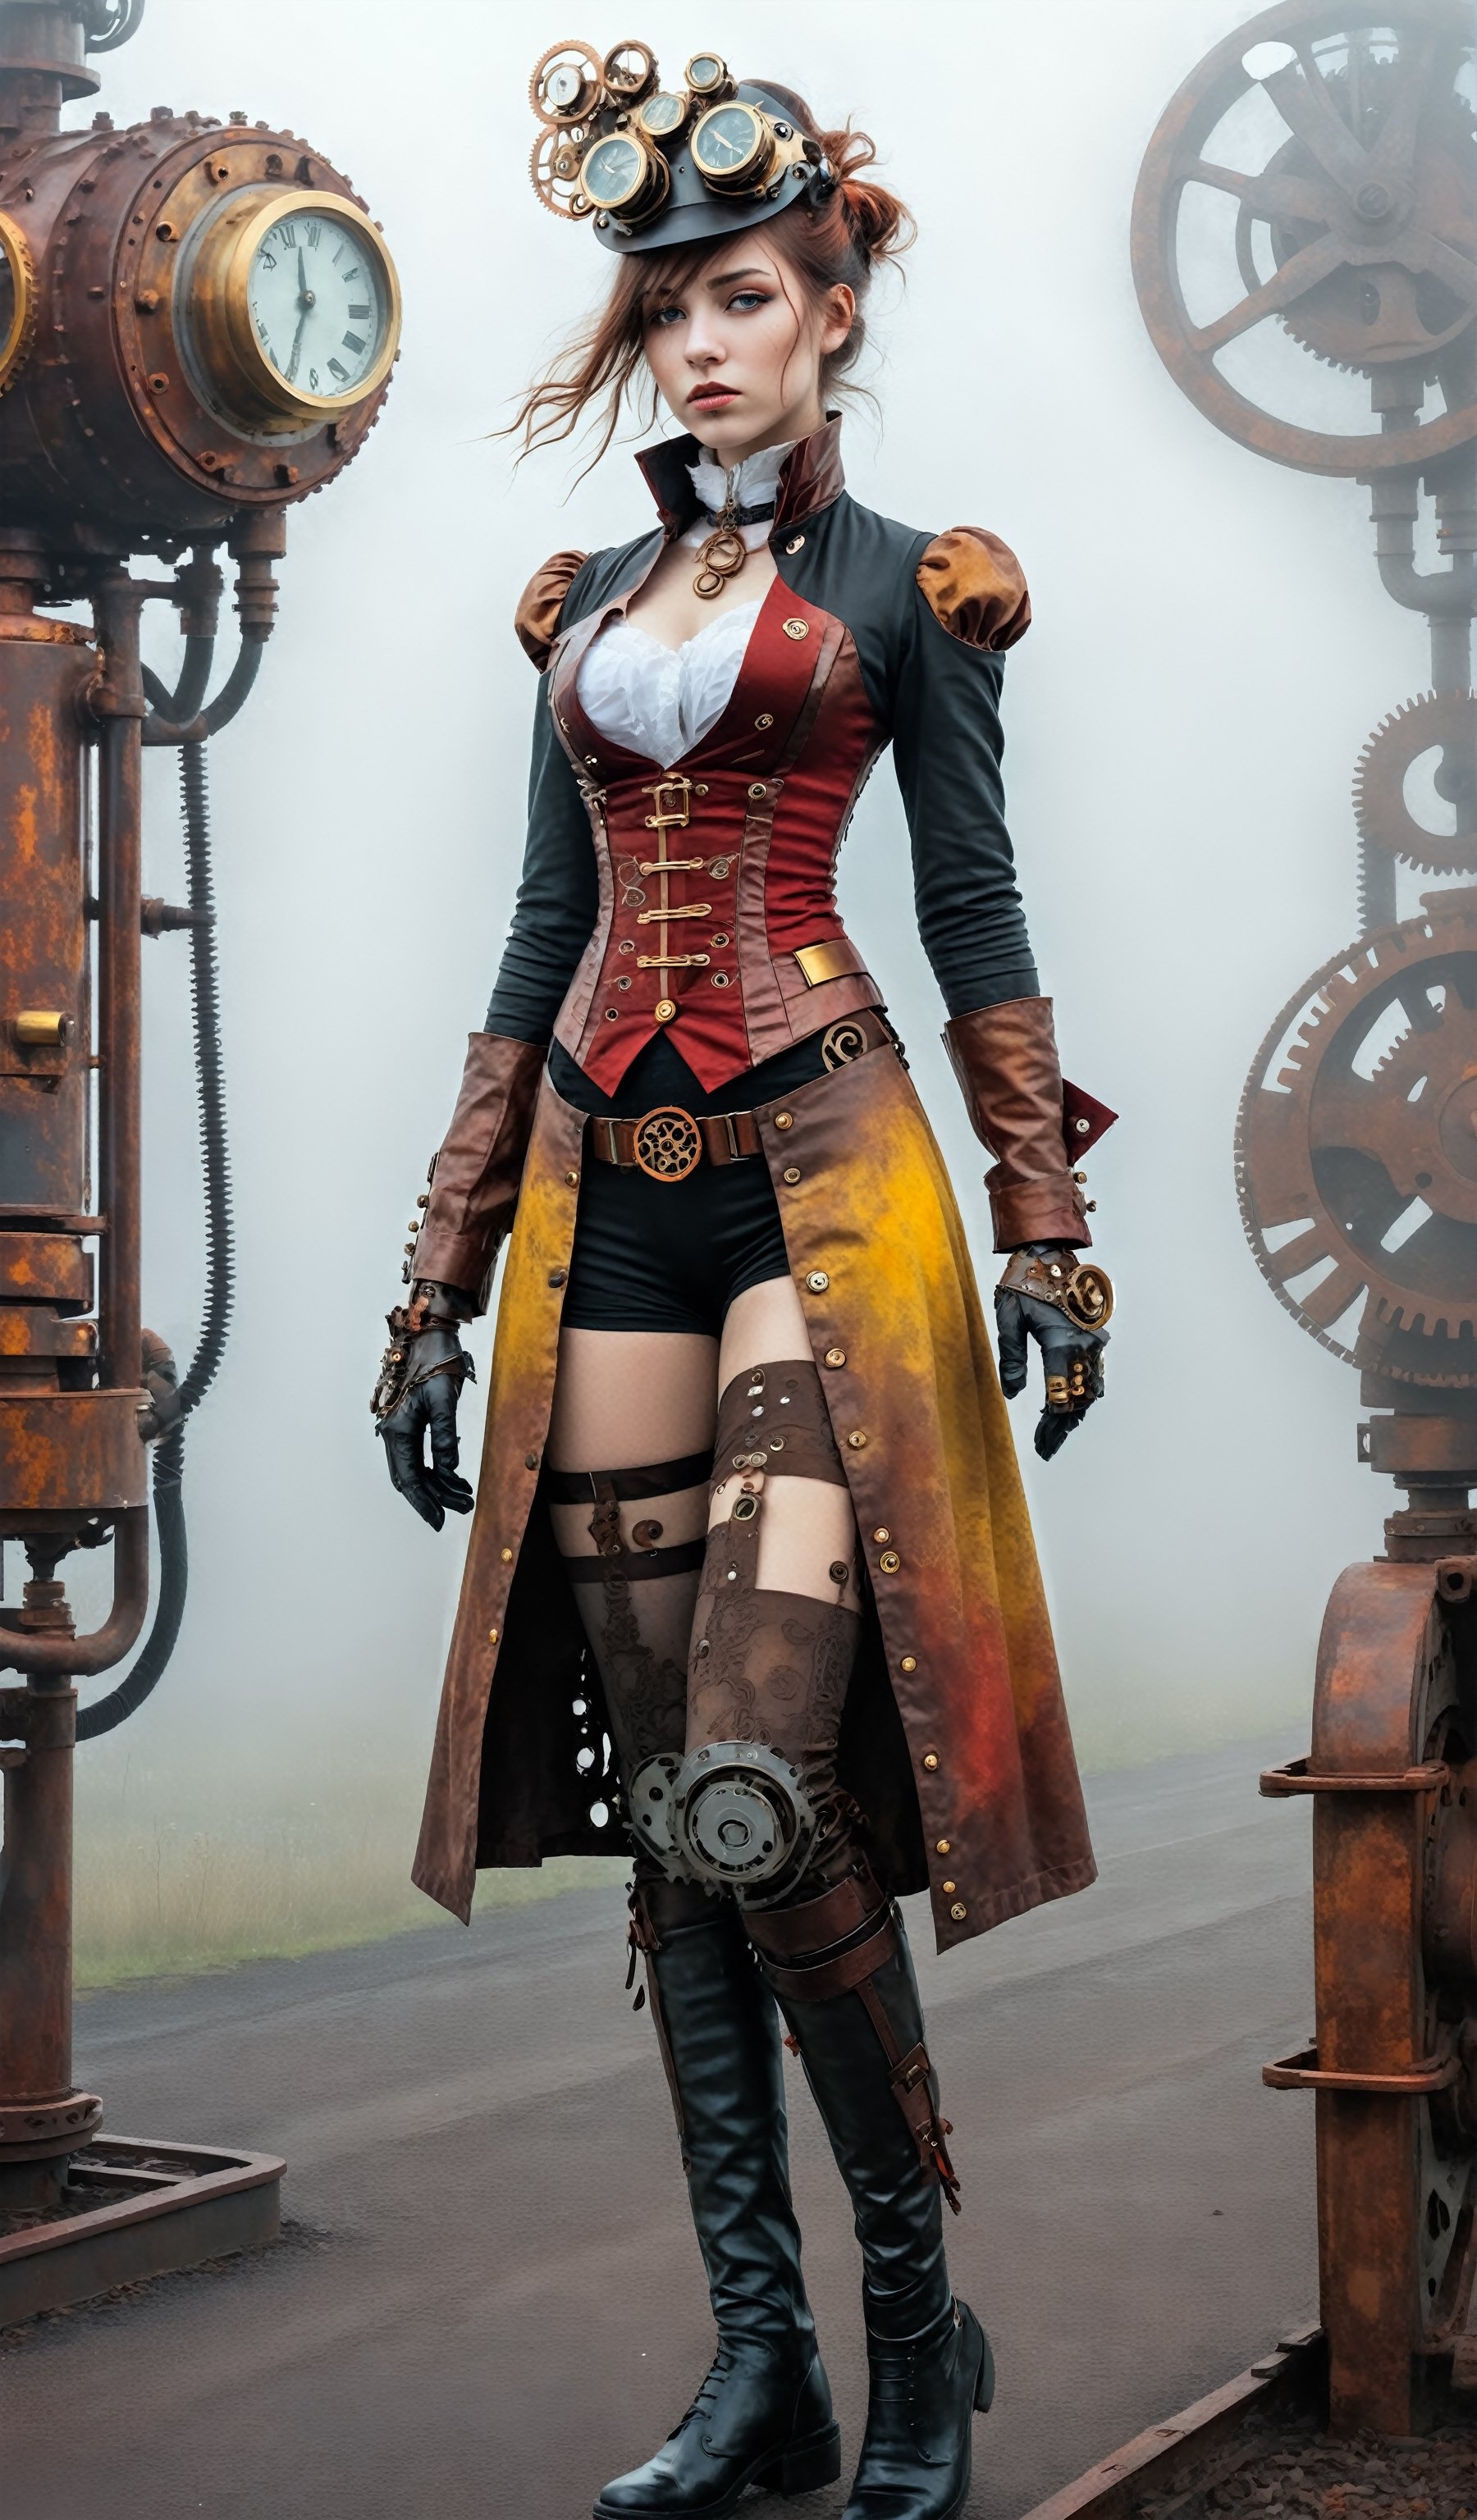 [cyborg girl], steampunk illustration, amidst fog with brass accents, [ombre red] and [rusted yellow] Highlights, mysterious, industrial aesthetics, time-honored charm